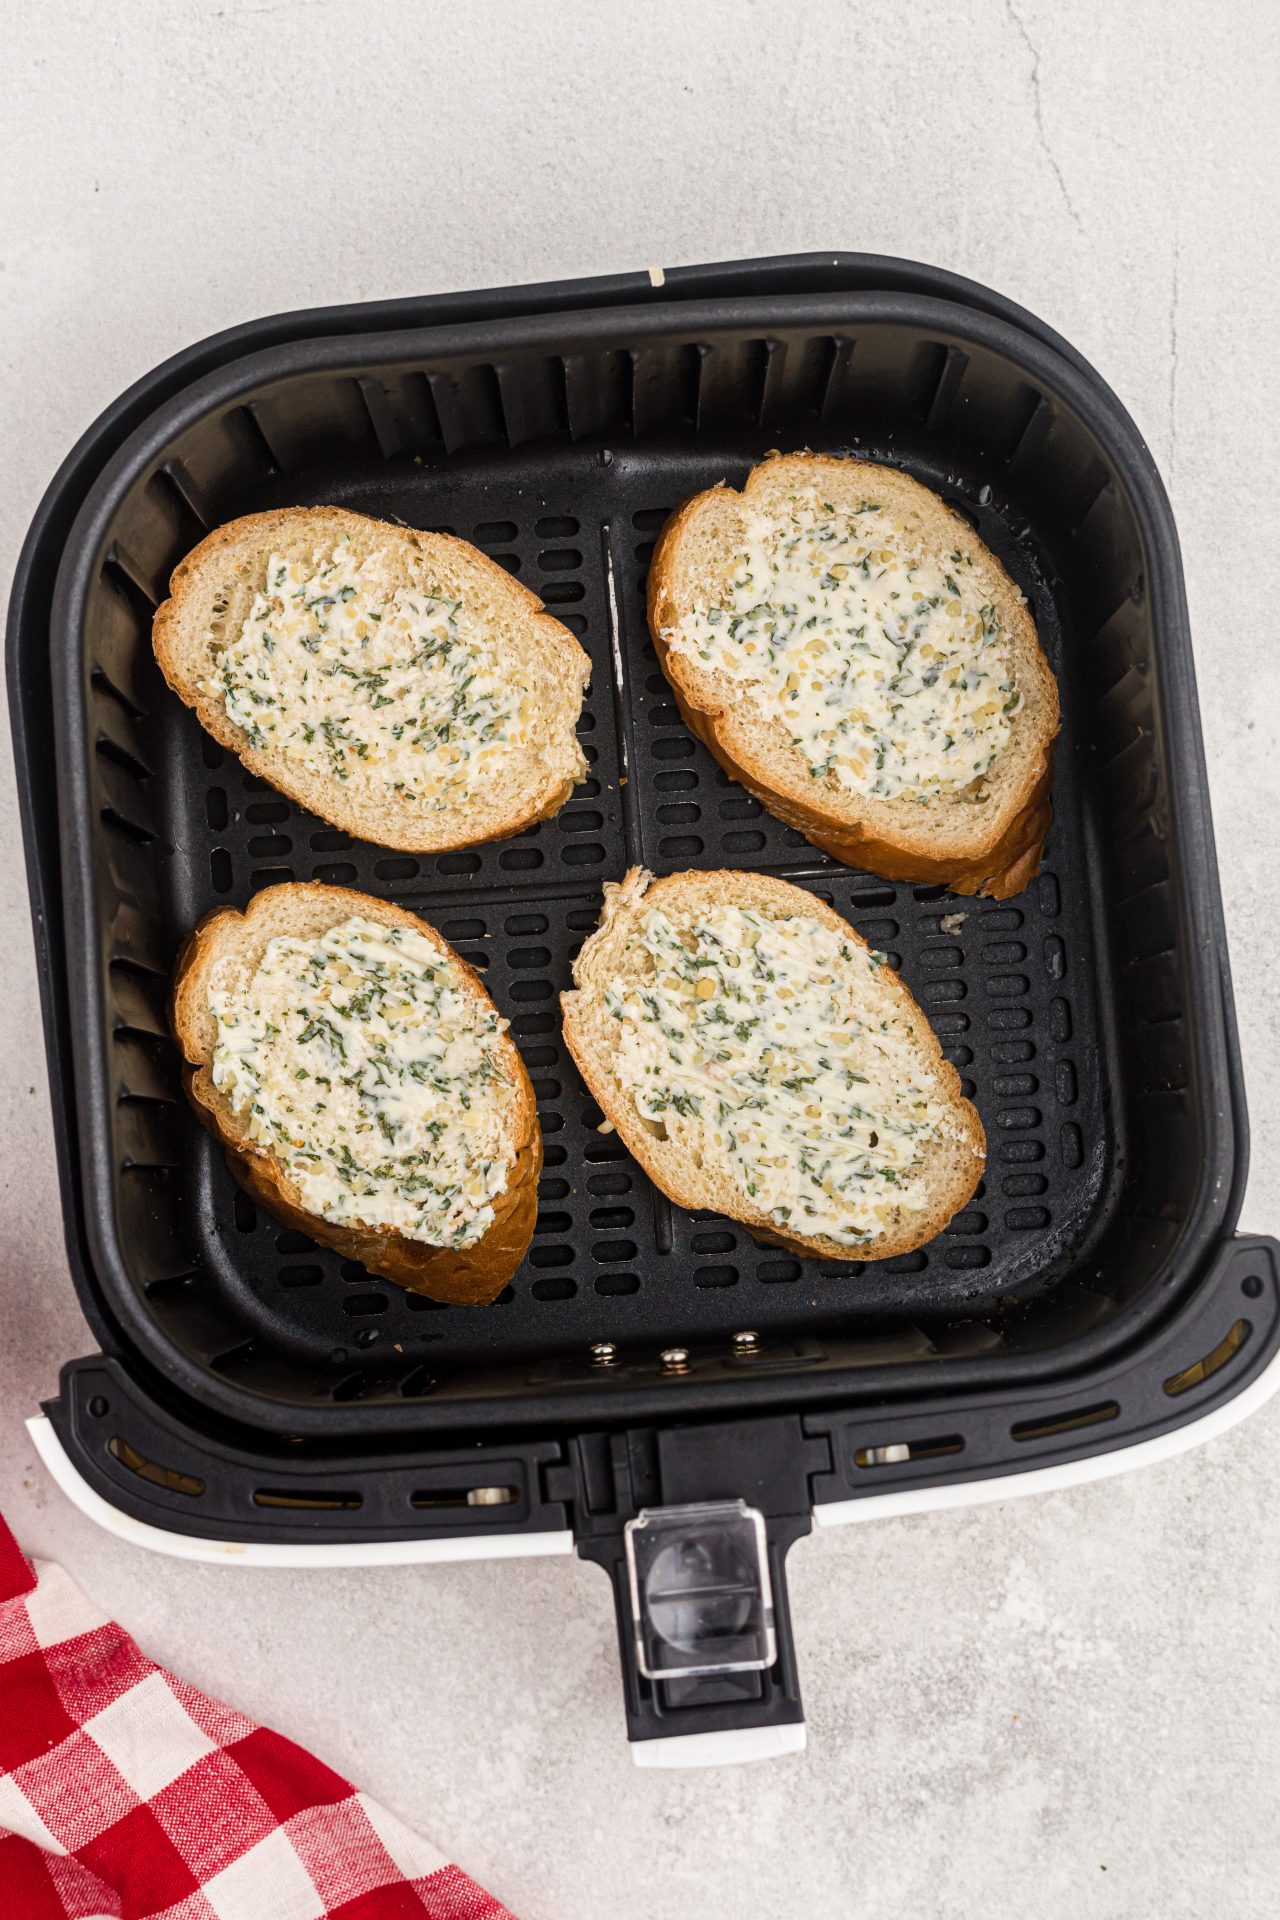 slices of bread with garlic butter spread on top in an air fryer basket